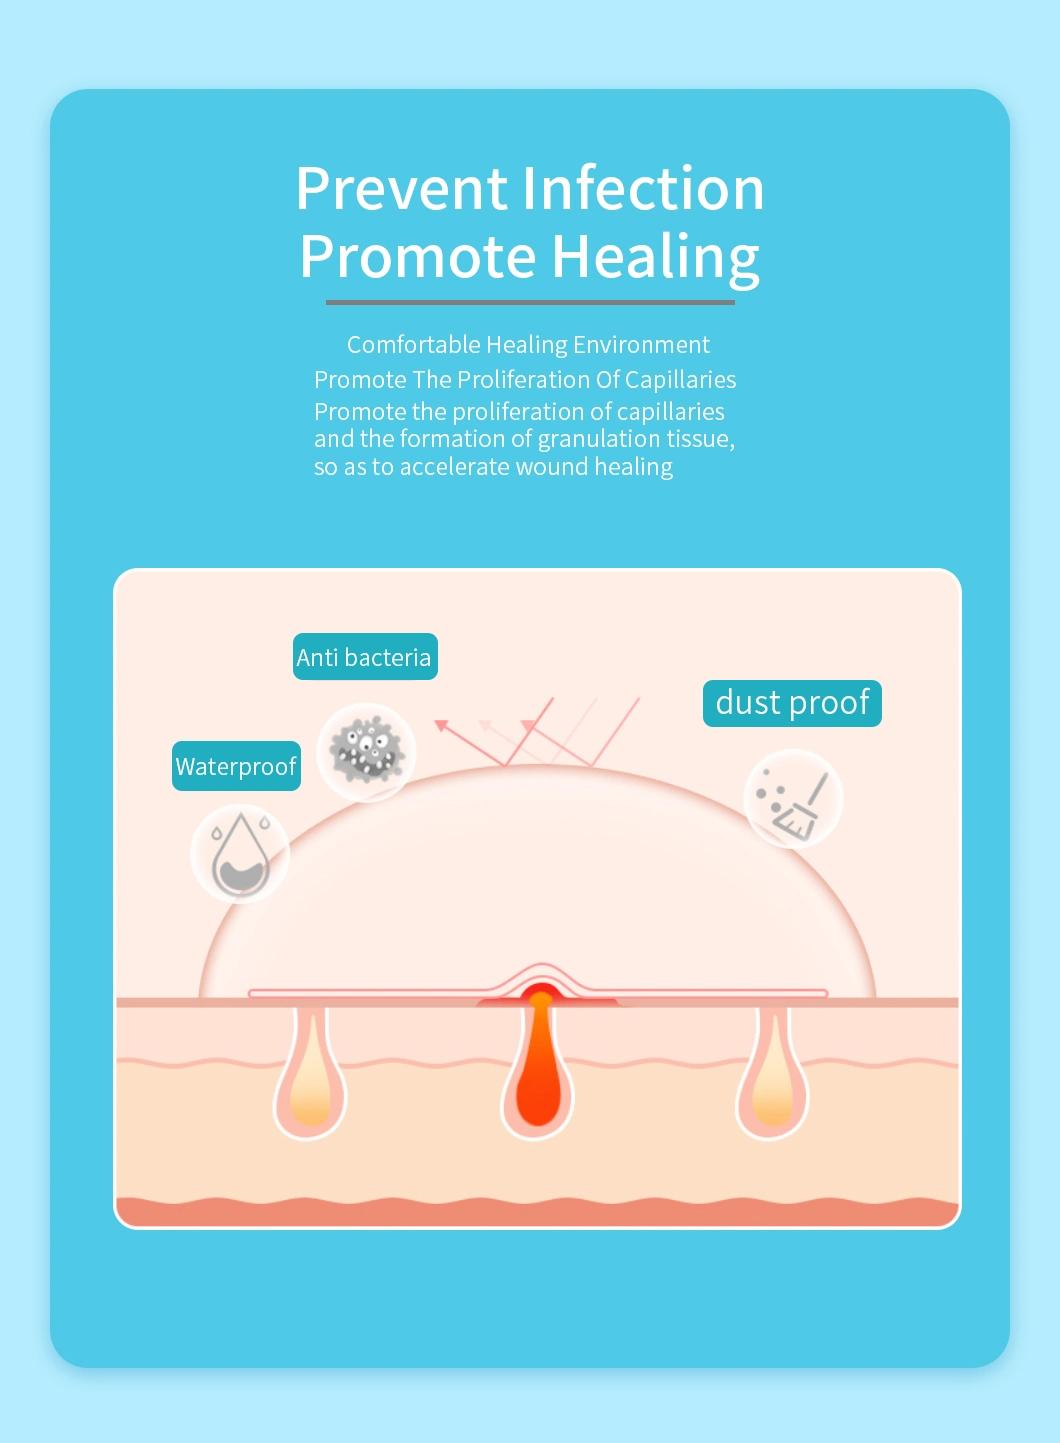 Hydrocolloid Foam Dressing Is Suitable to Heavily Drainage Wound